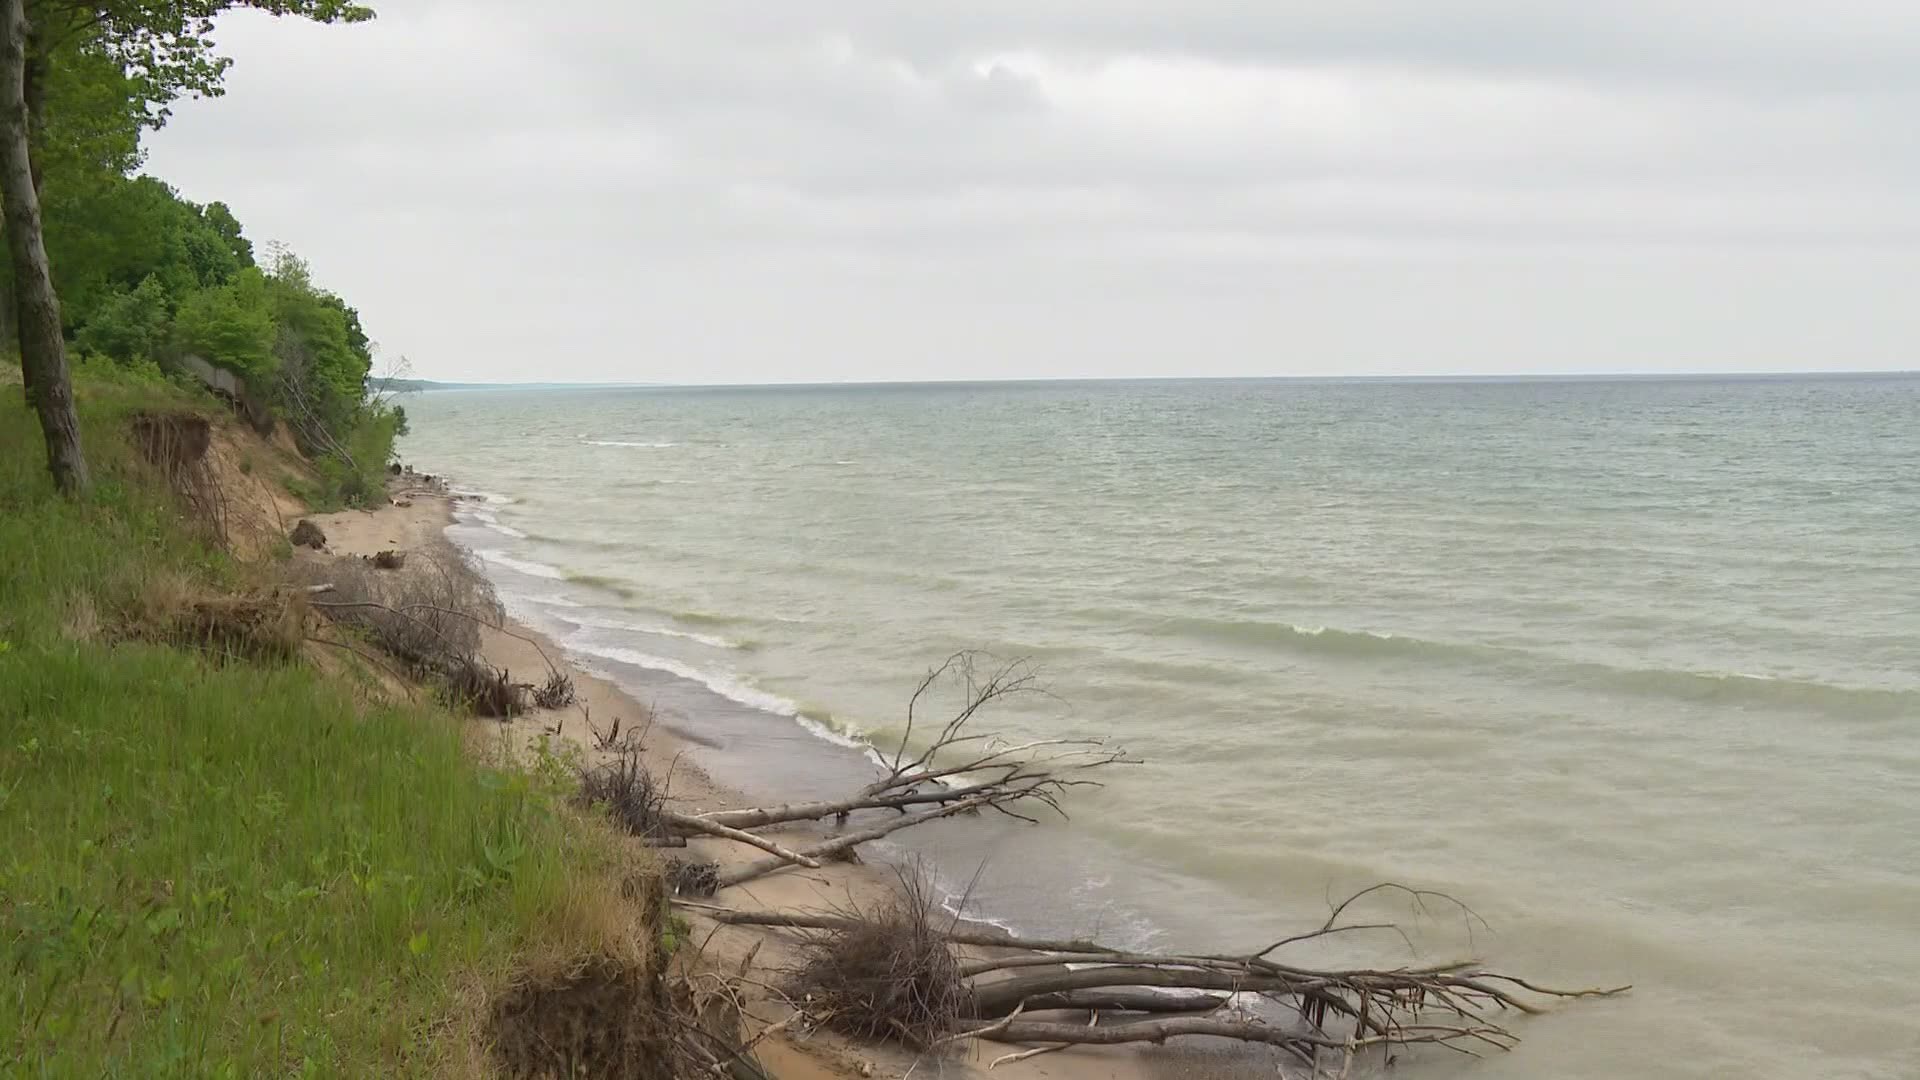 A South Haven homeowner looked over her bluff and saw the remains of a shipwreck that had never been there before. The "City of Green Bay" schooner had moved.